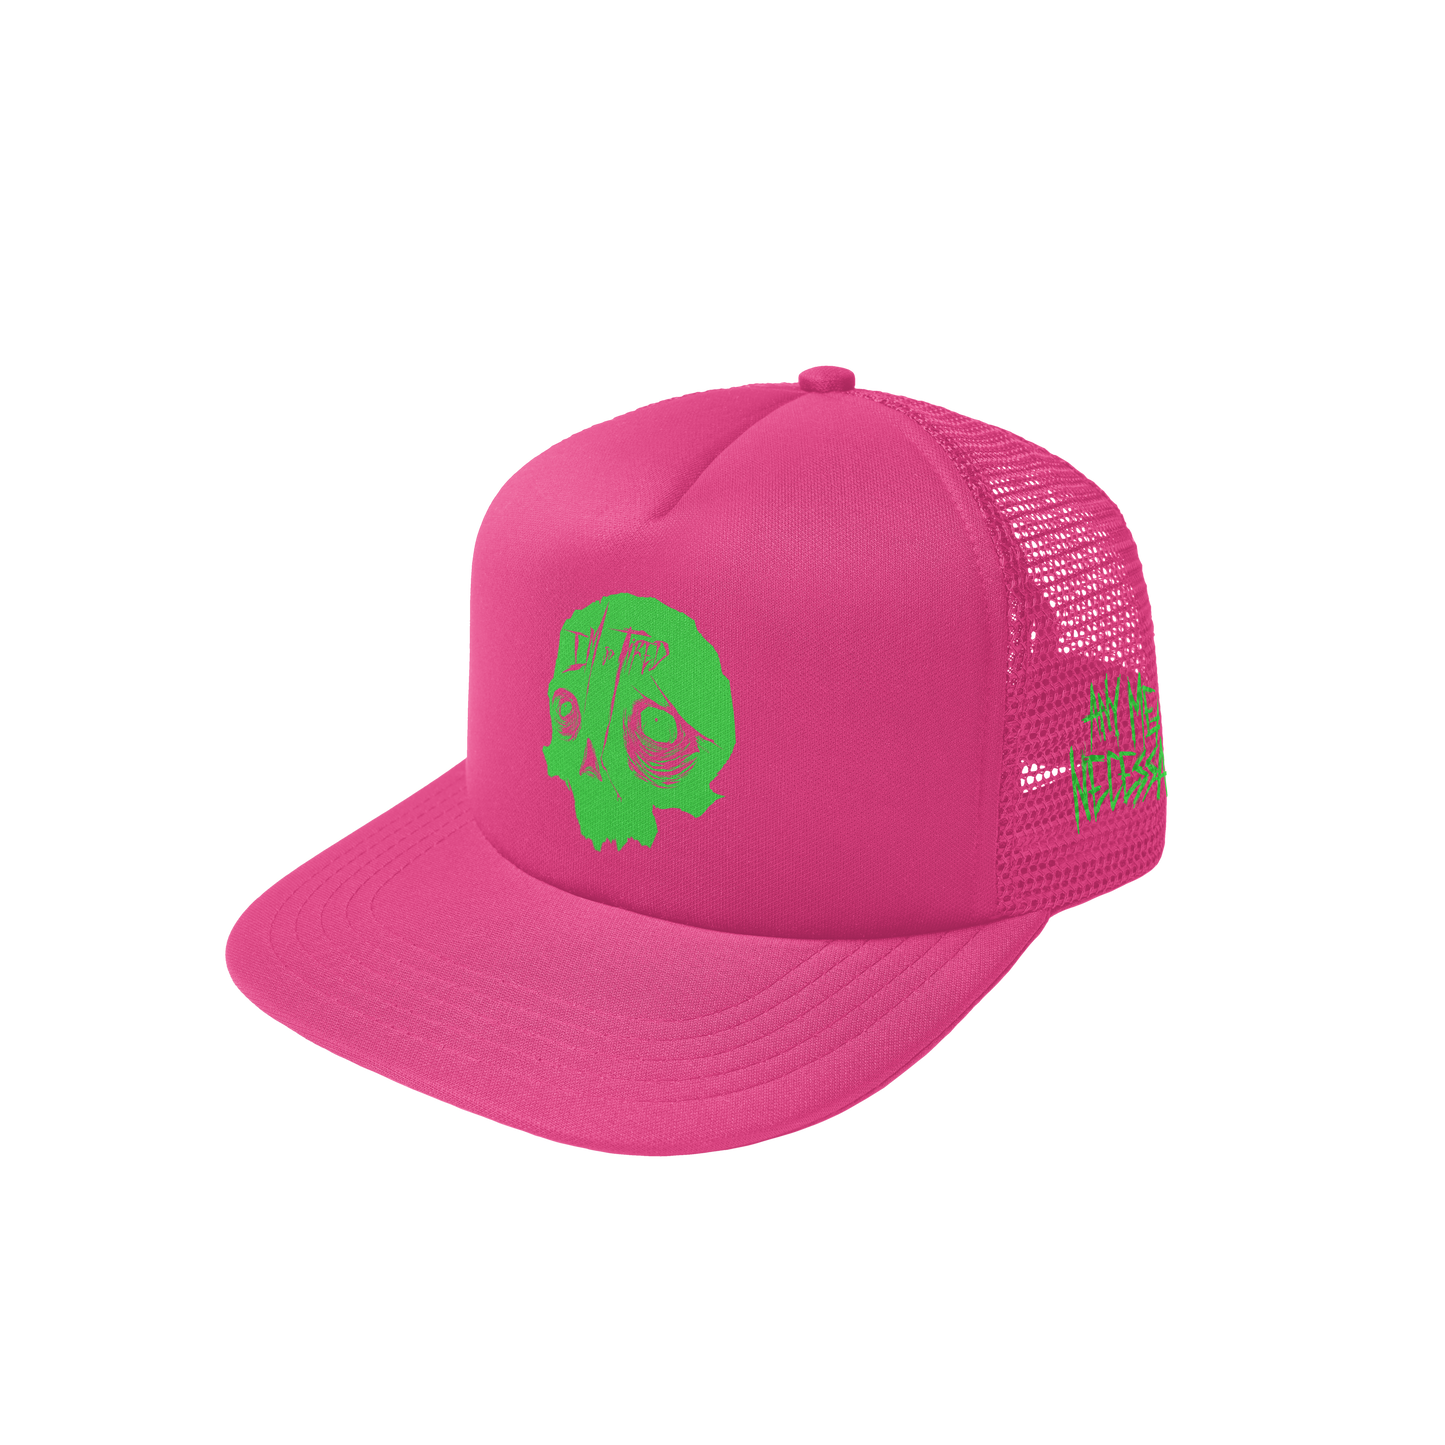 any means necessary shawn coss mesh foam trucker hat neon pink neon green